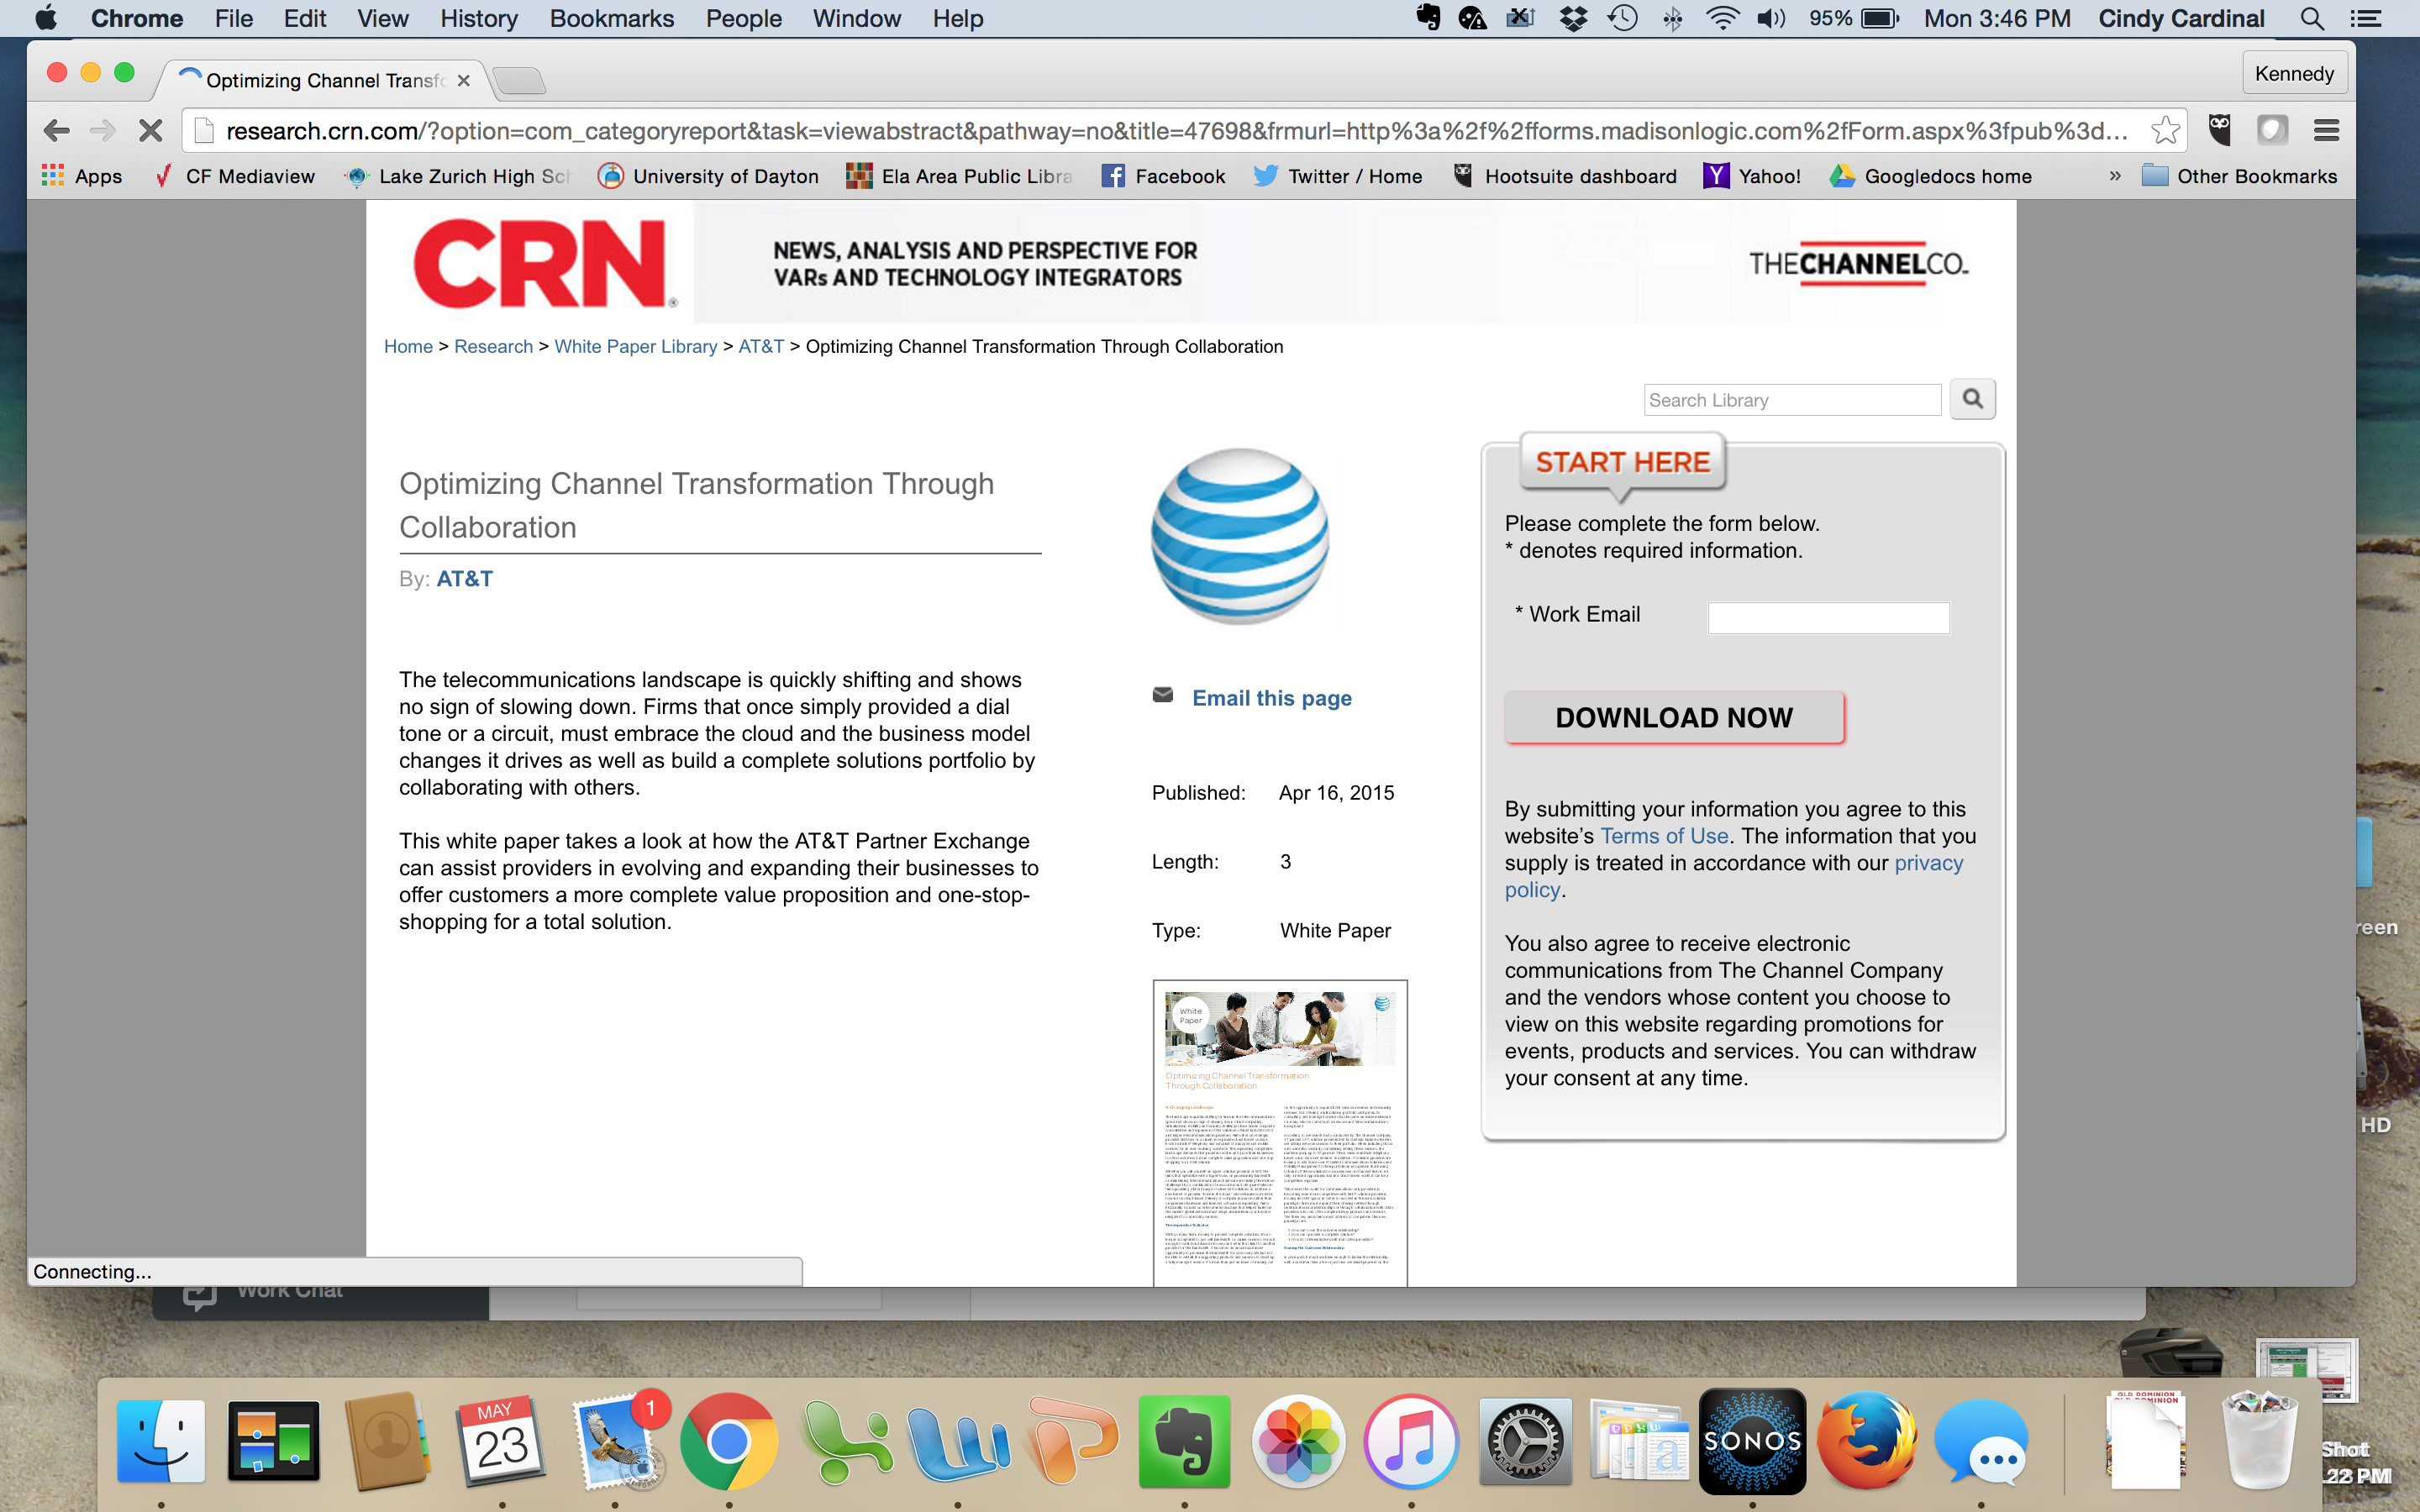 CRN email only at 3.46.02 PM